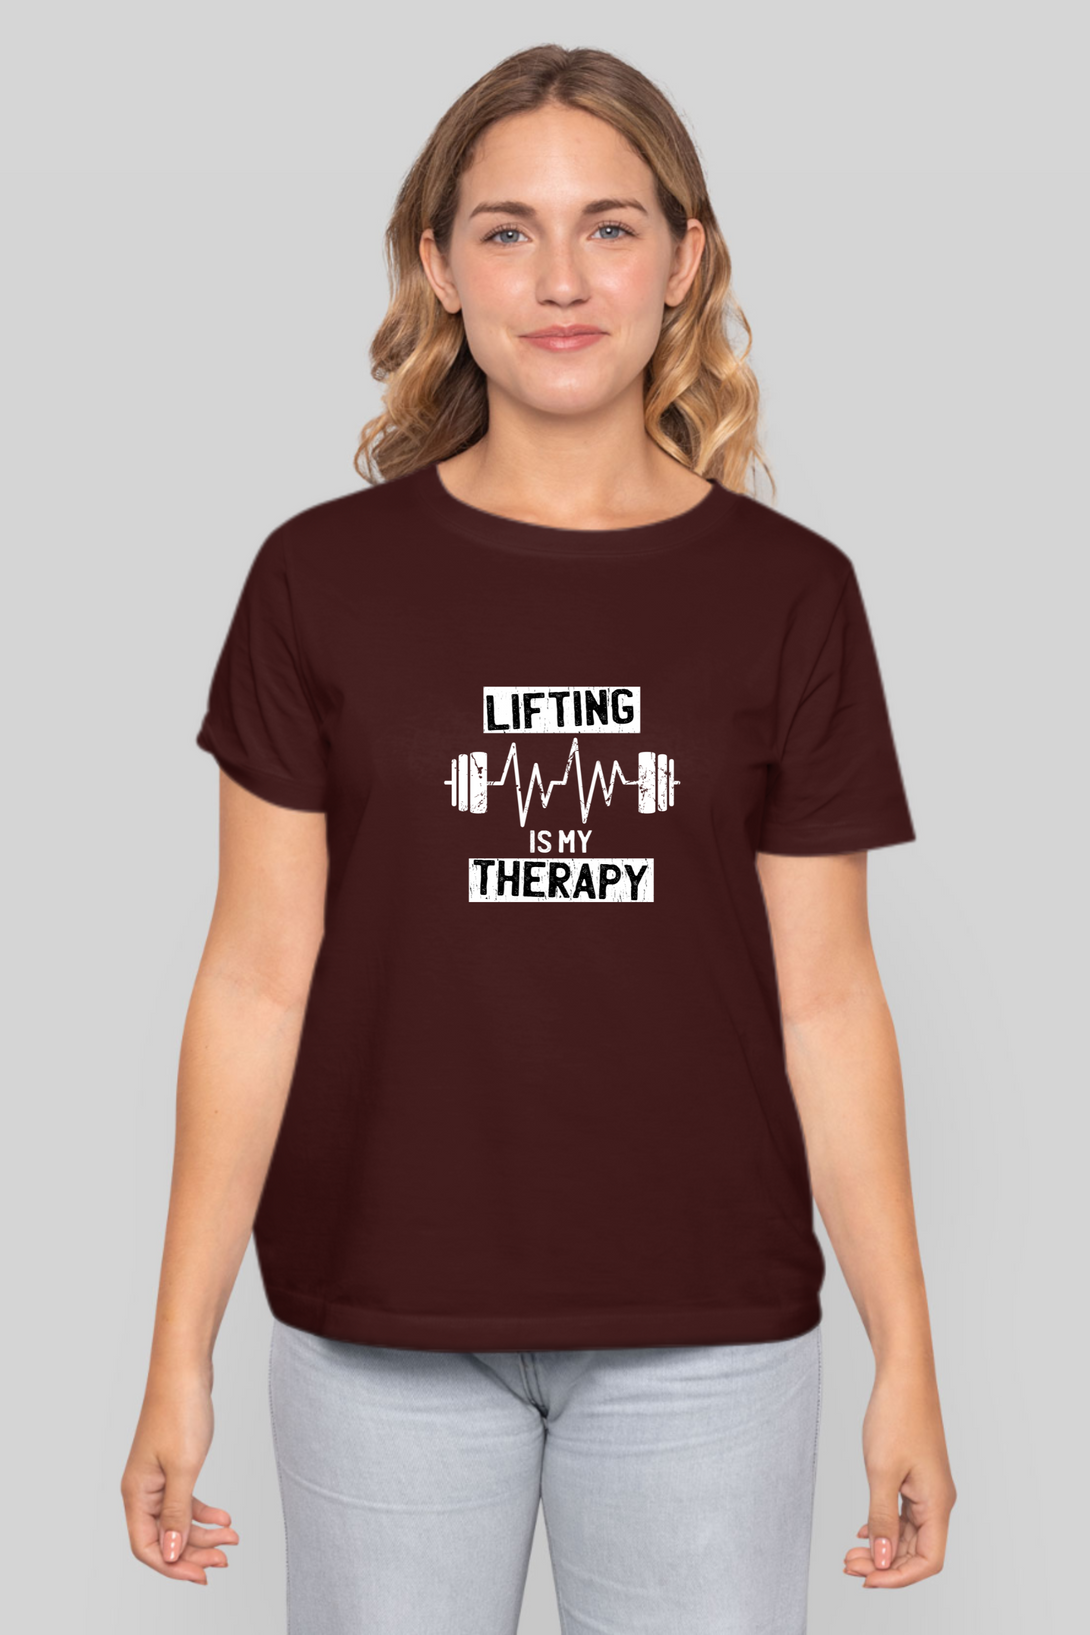 Lifting Is My Therapy Printed T-Shirt For Women - WowWaves - 12